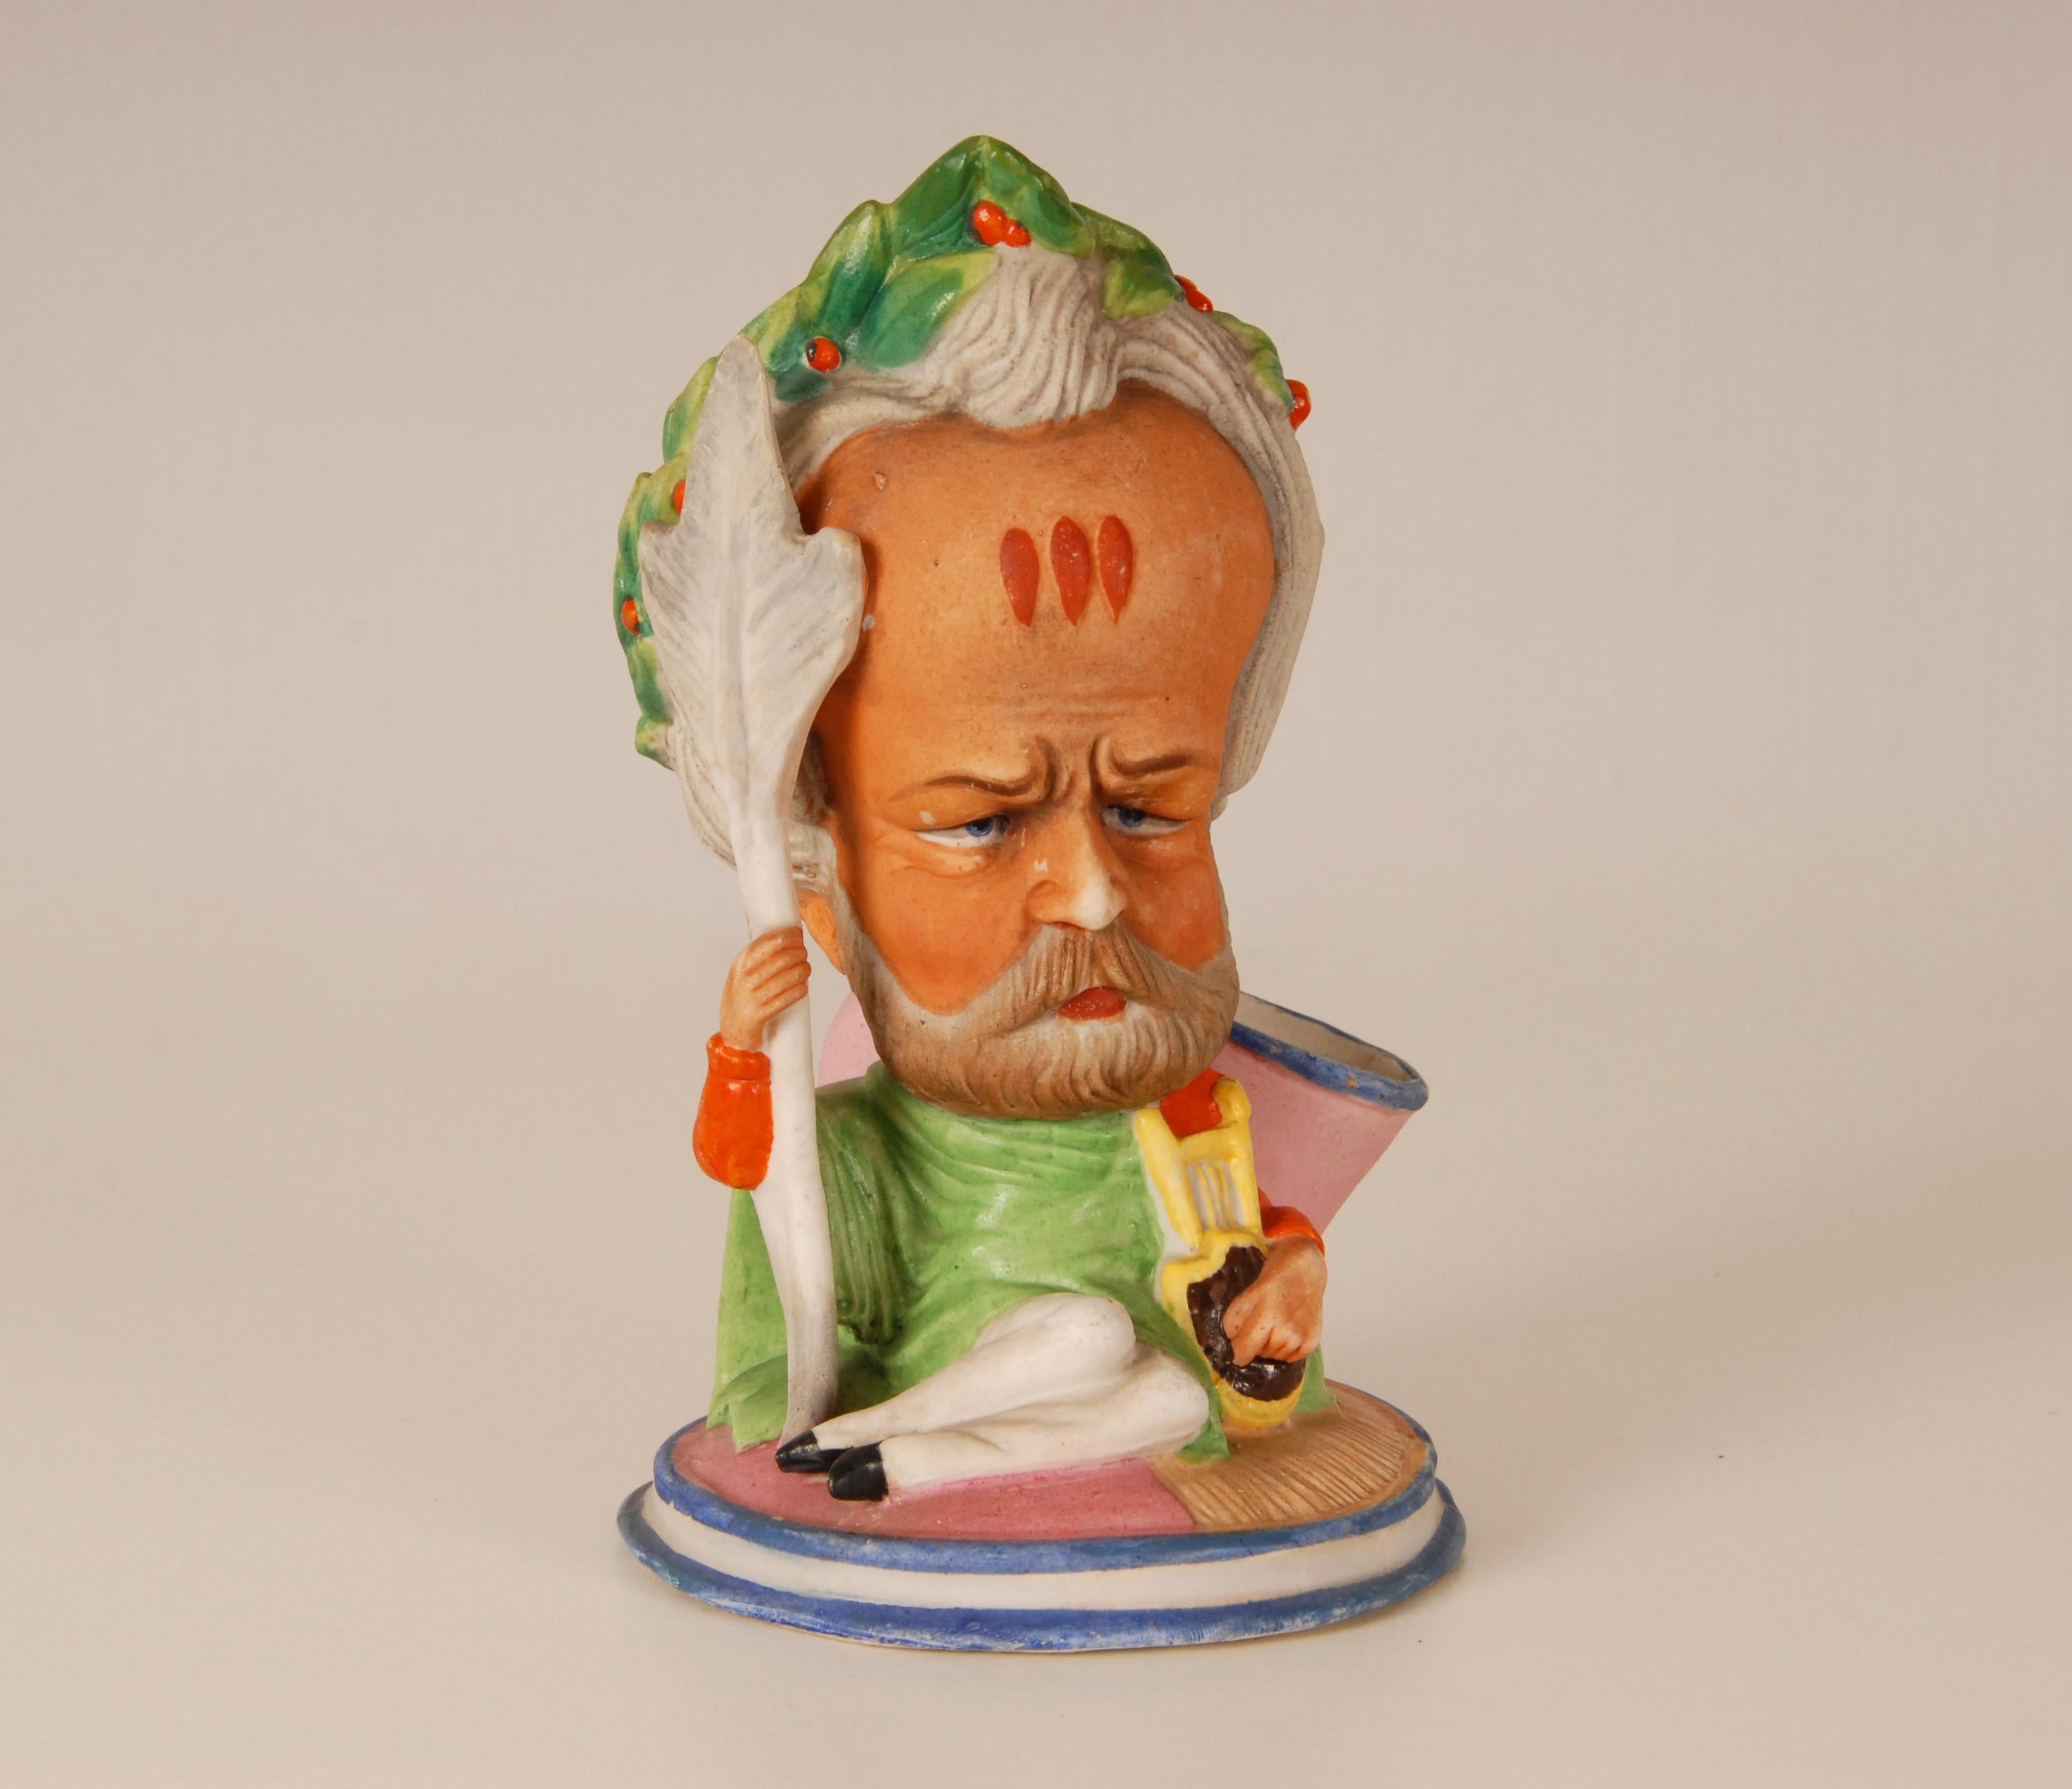 Antique French Old Paris porcelain Caricature figures
Depiction of Victor Hugo and Alexandre Duma 
Alexandre Duma the intellectual and well known Author, Dramatist and historical novelist Alexandre Dumas.
He was one of the more prolific and most